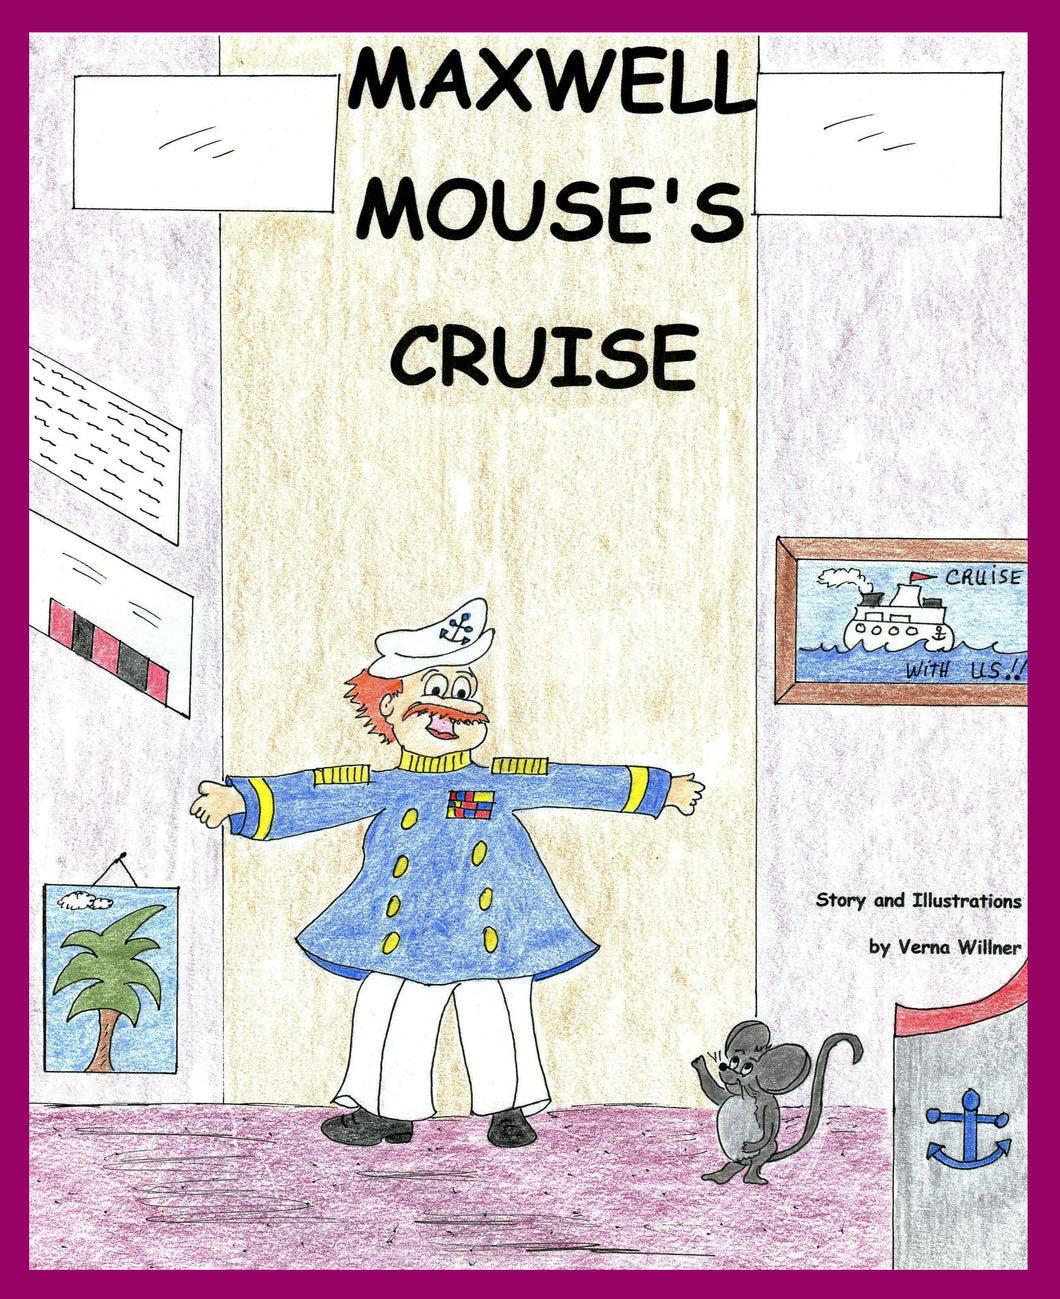 Maxwell Mouse's Cruise